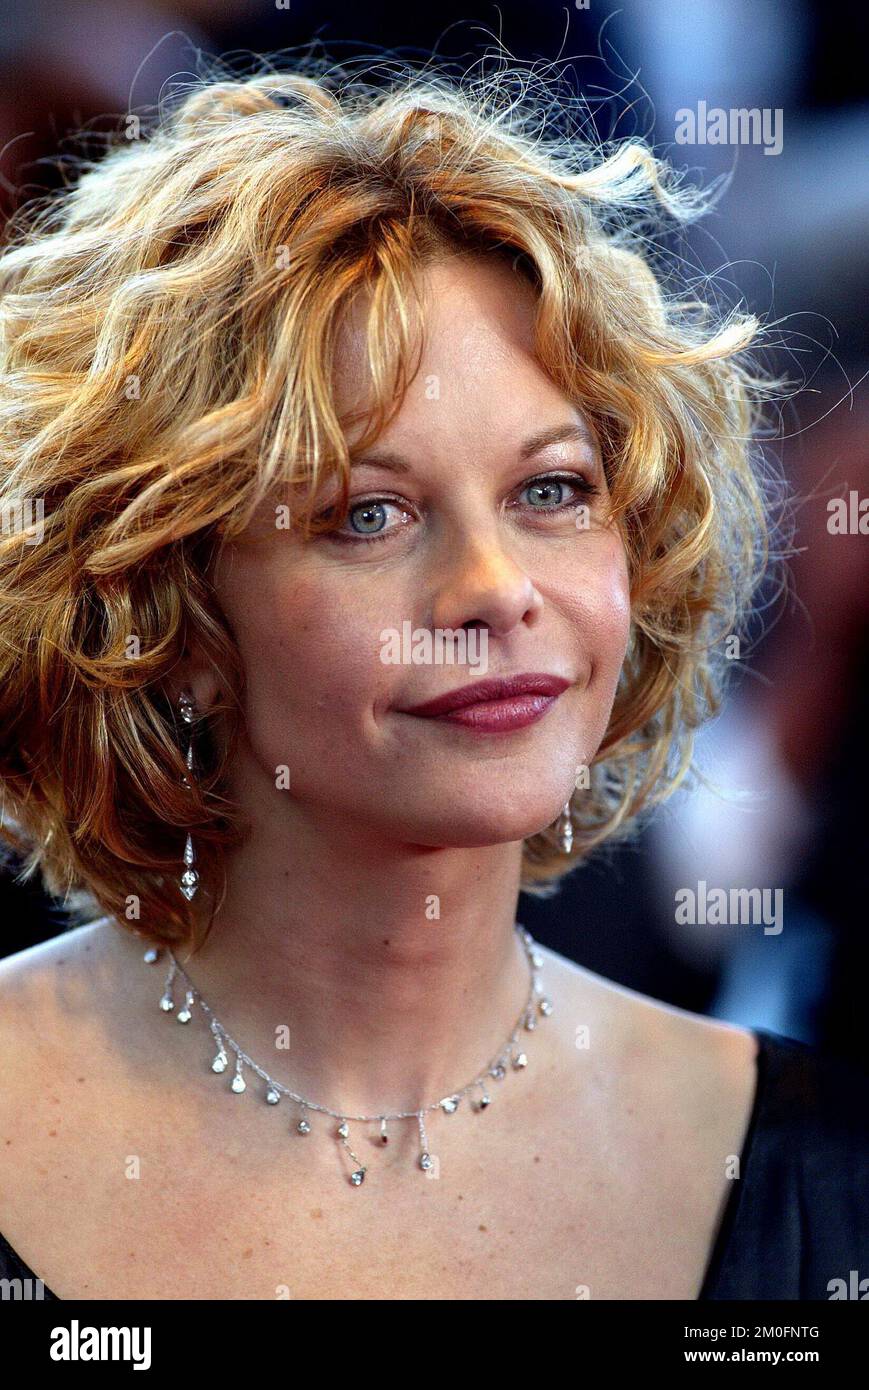 PA PHOTOS / POLFOTO - UK USE ONLY: American actress Meg Ryan at the 51st Cannes Film Festival, Stock Photo